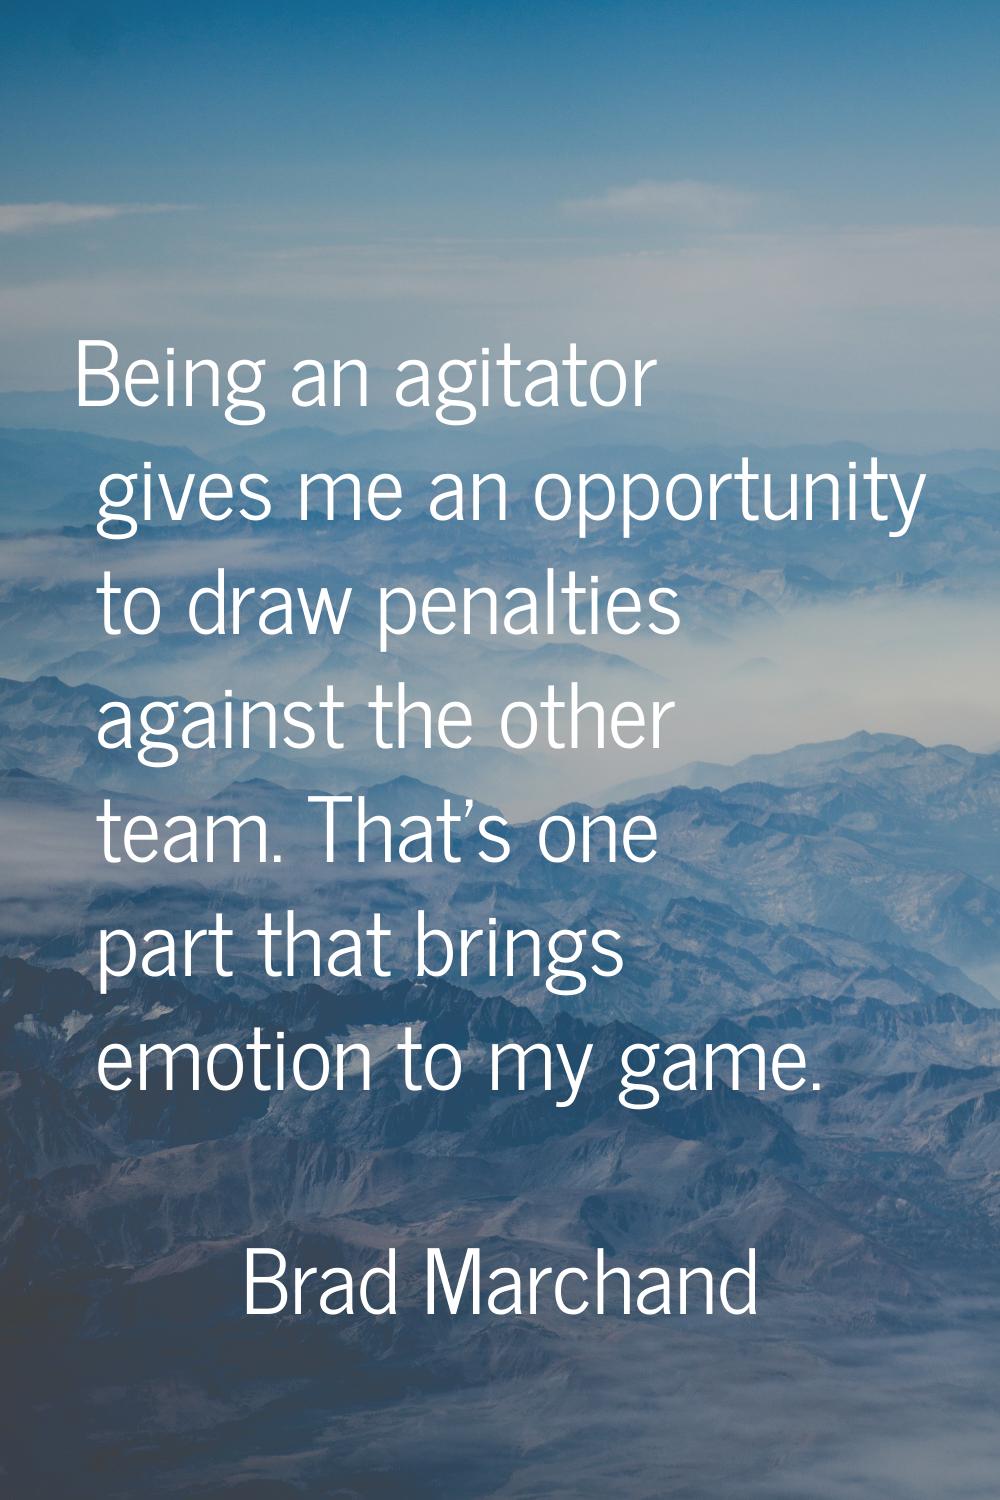 Being an agitator gives me an opportunity to draw penalties against the other team. That's one part